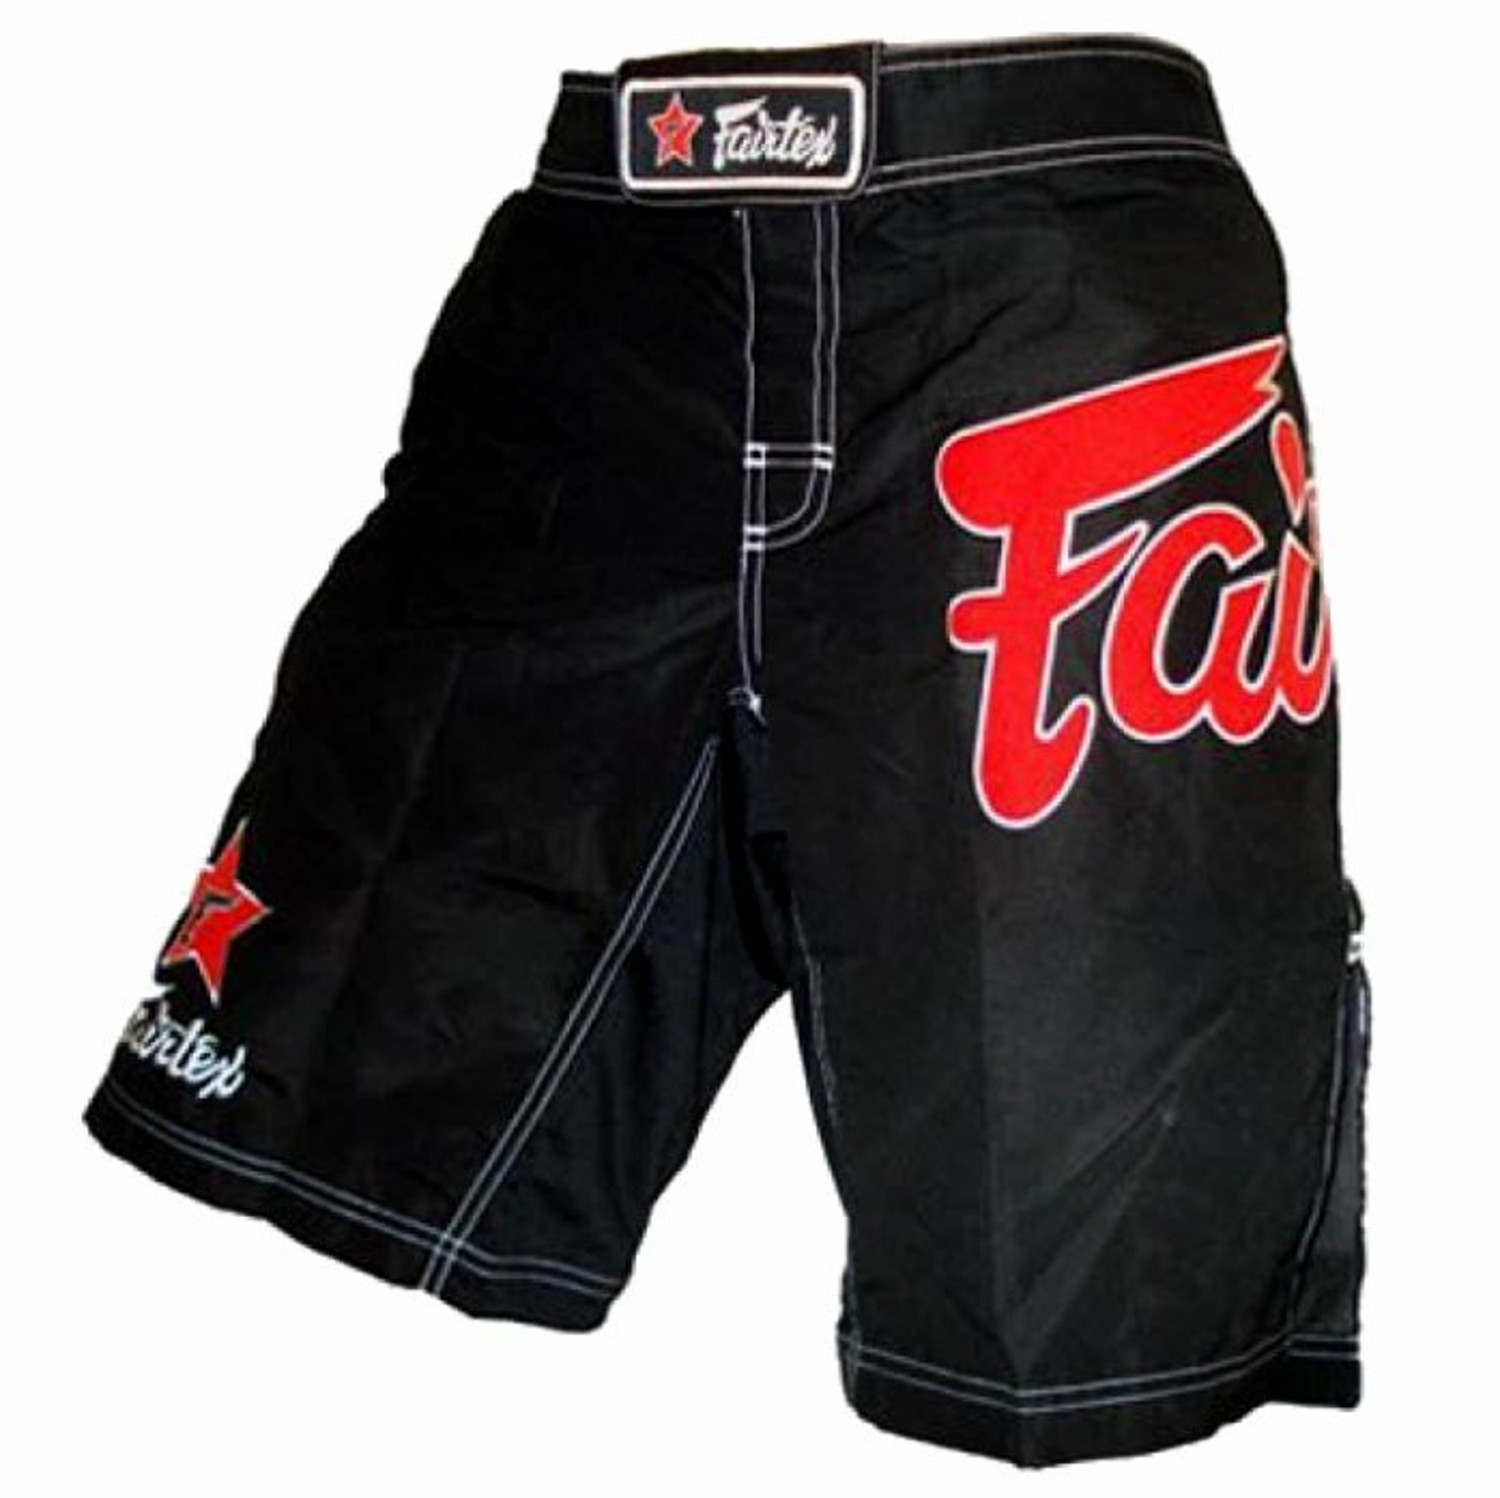 Enice Black & Red Fight Shorts 